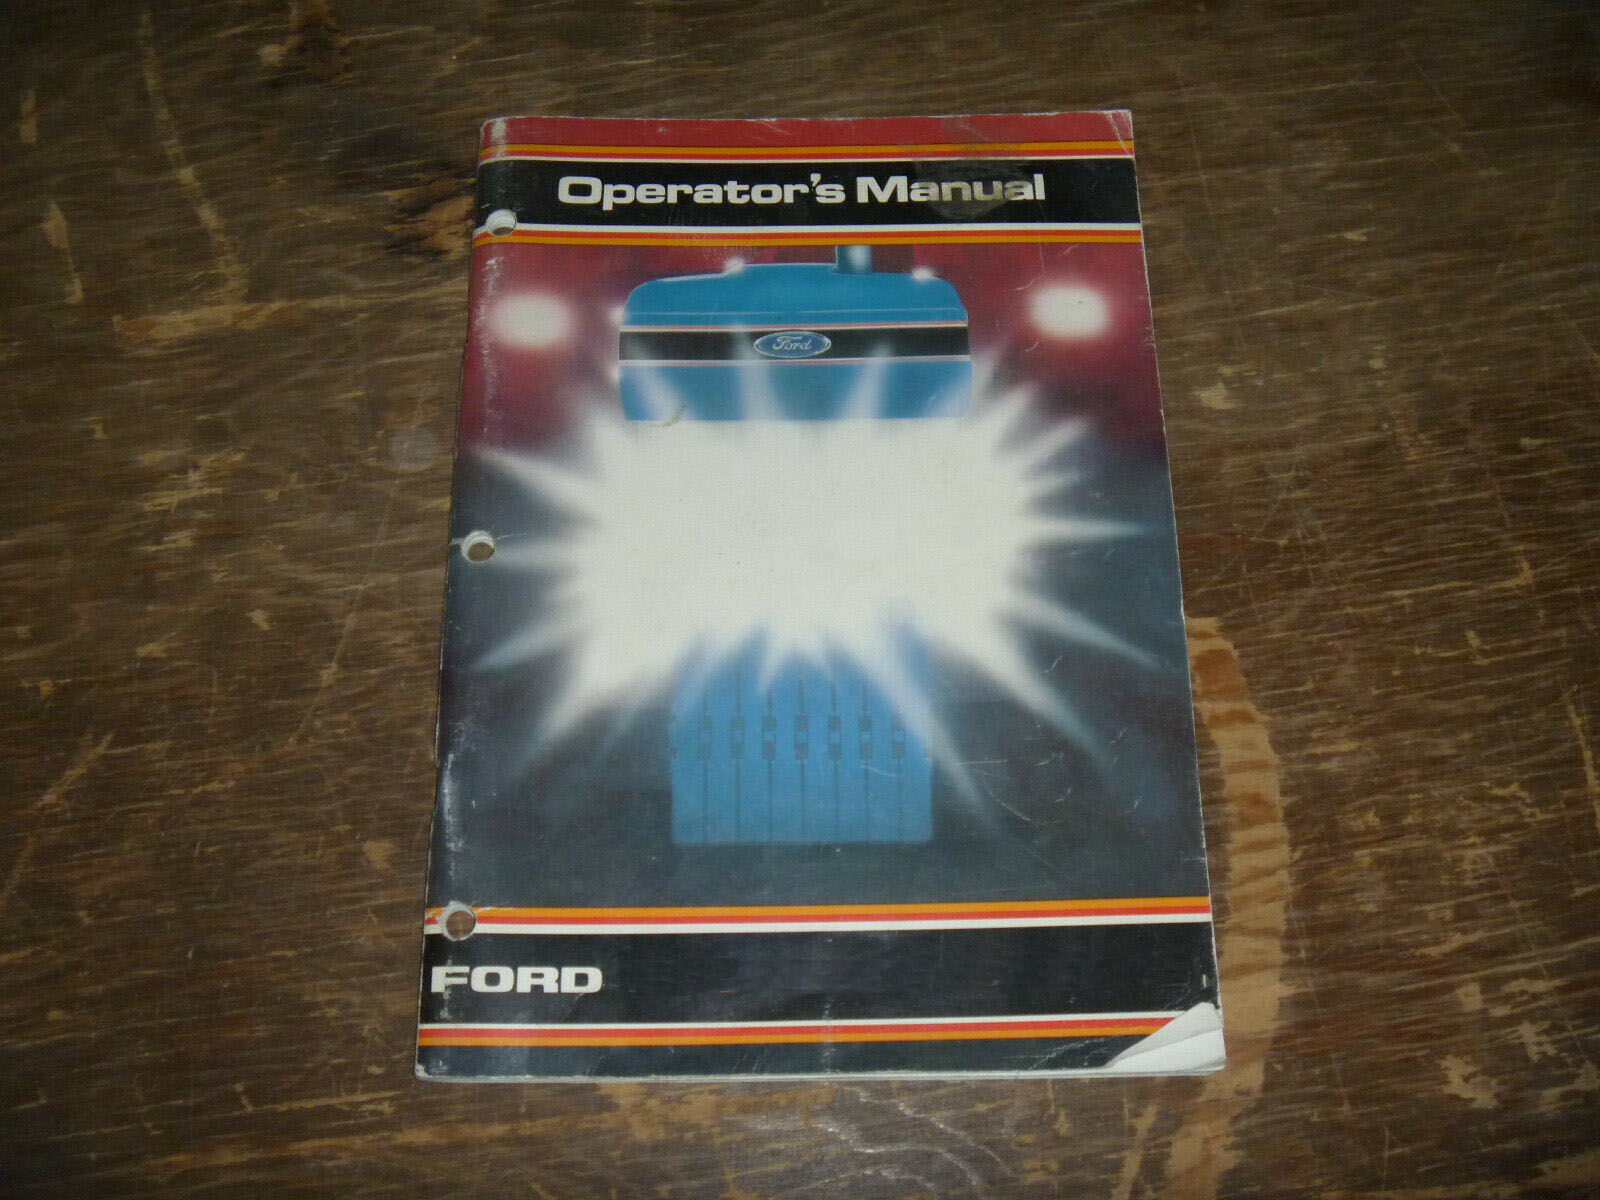 Operator's Manual for FORD Tractors model 1150